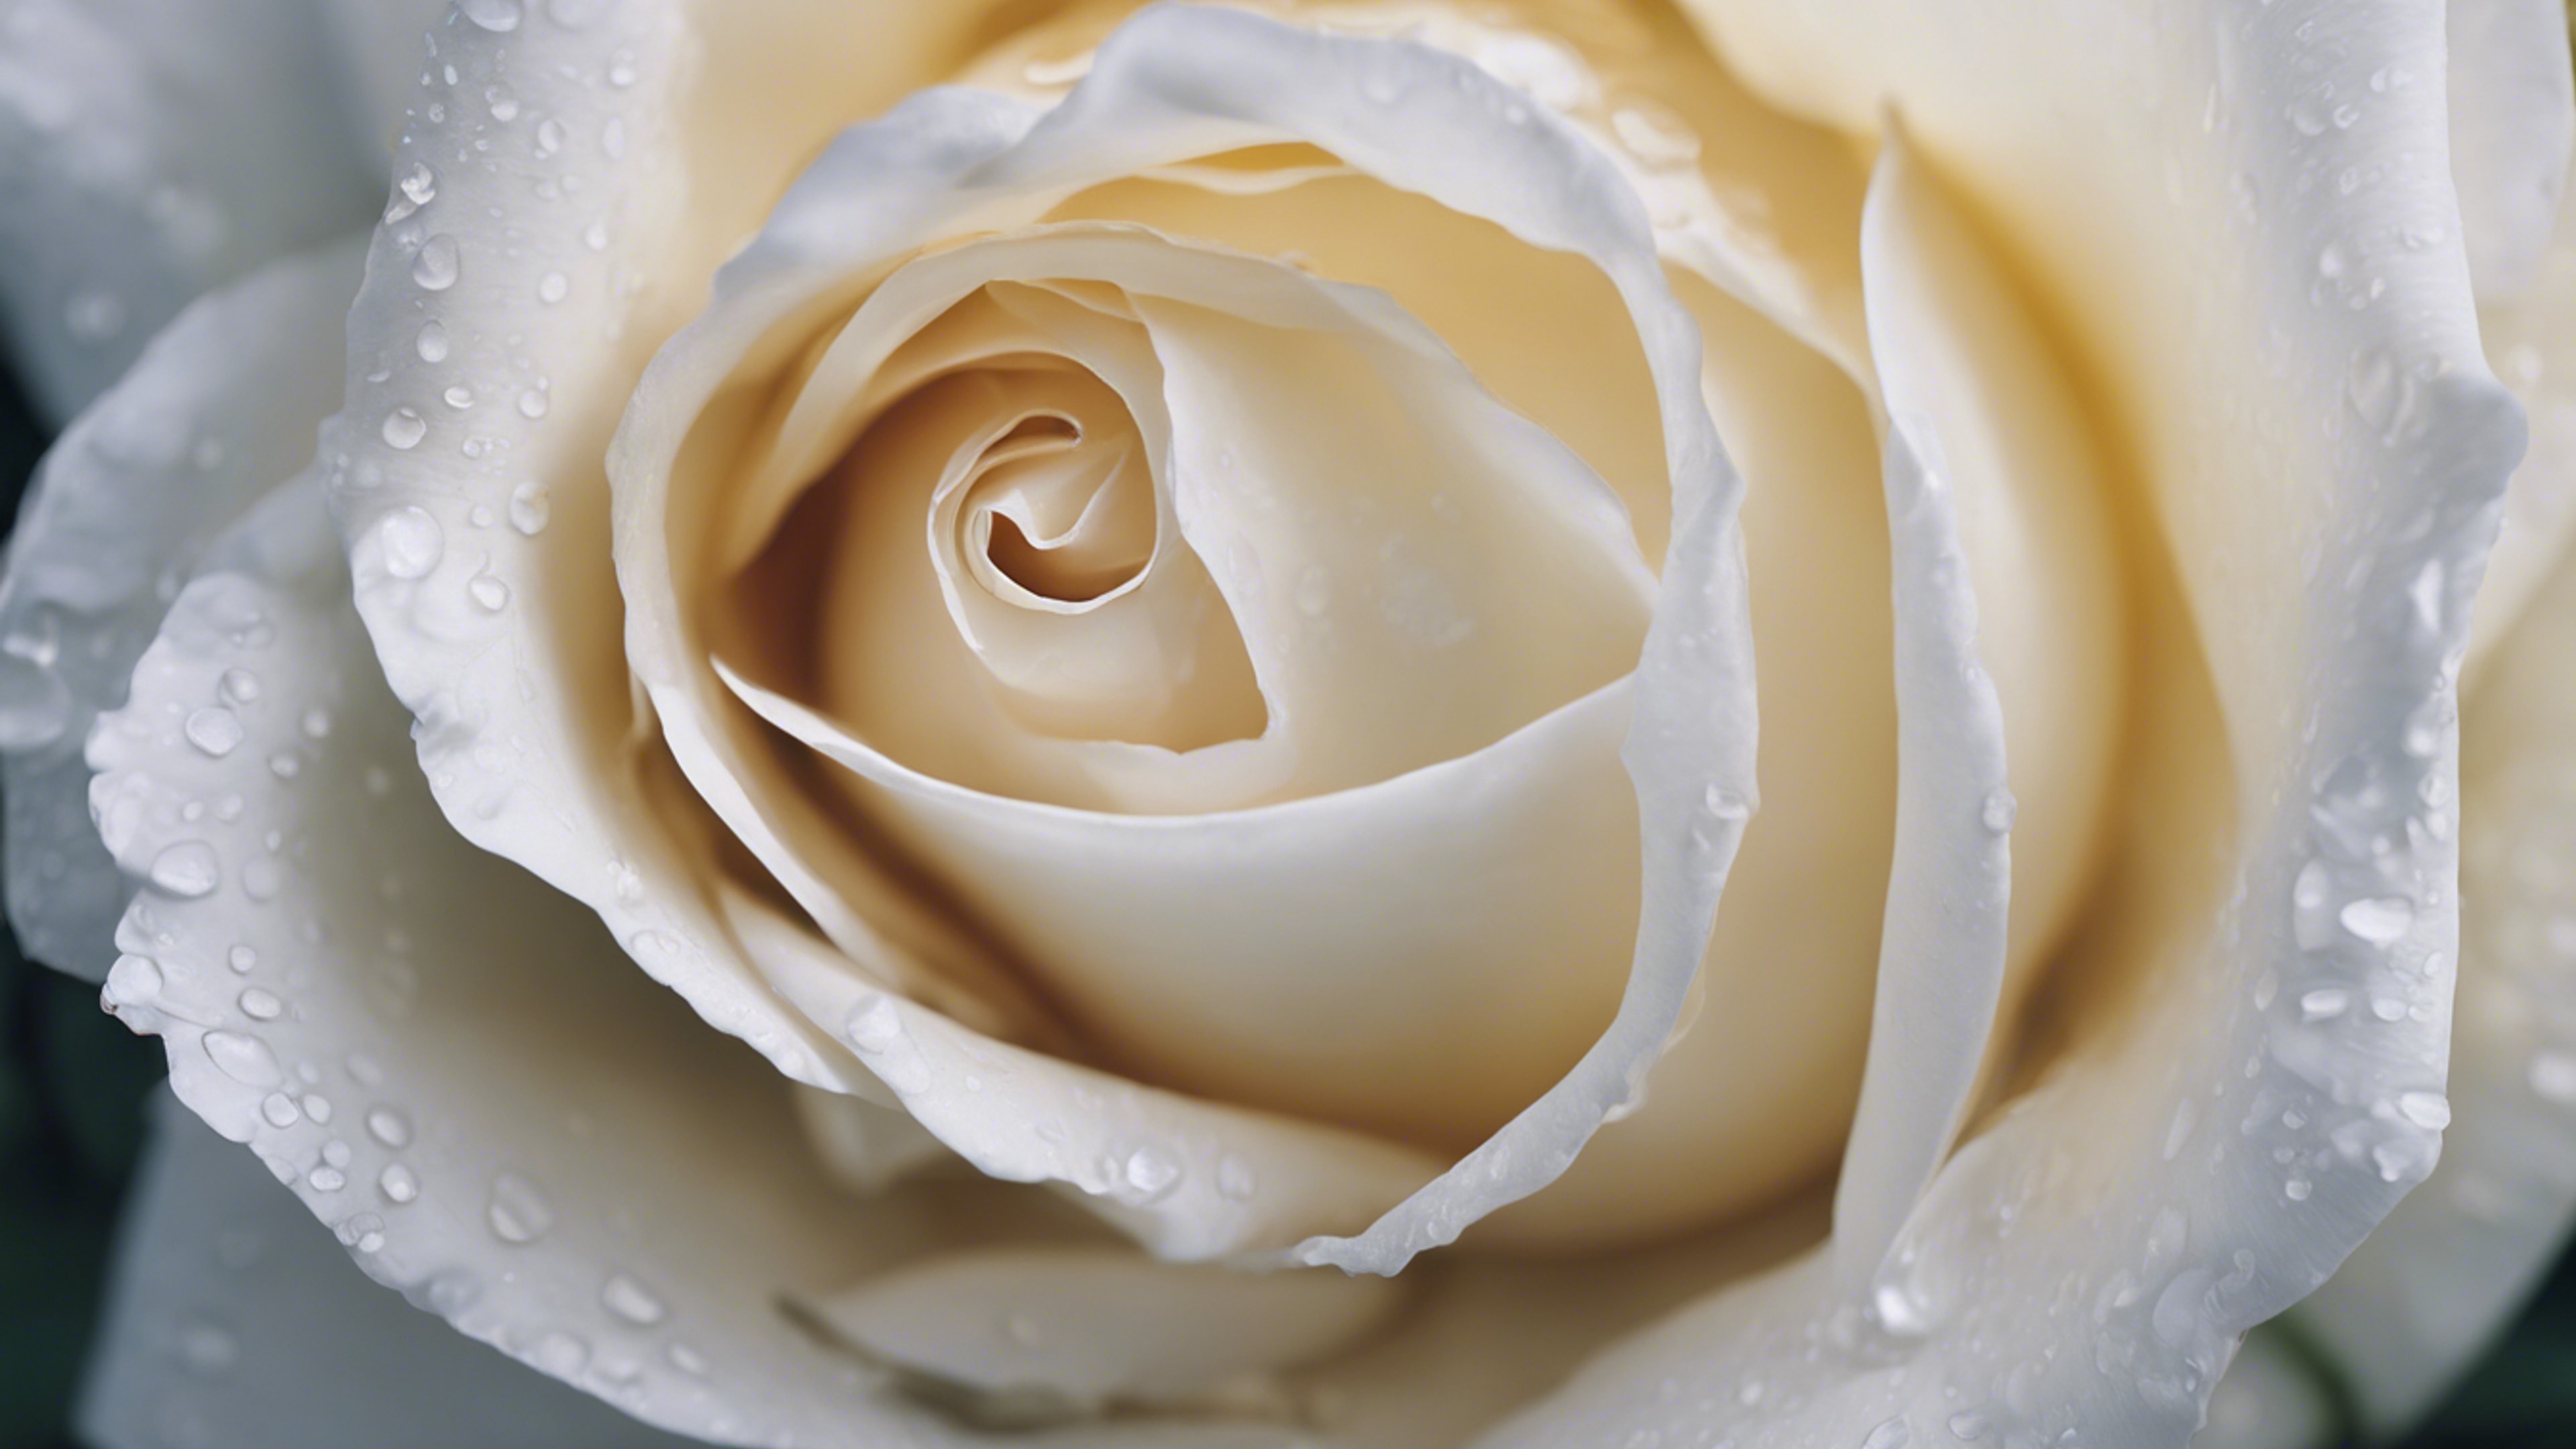 Zoomed view of the velvety petals of a white rose. Ფონი[9ebd1bf4e1a74c36ba13]